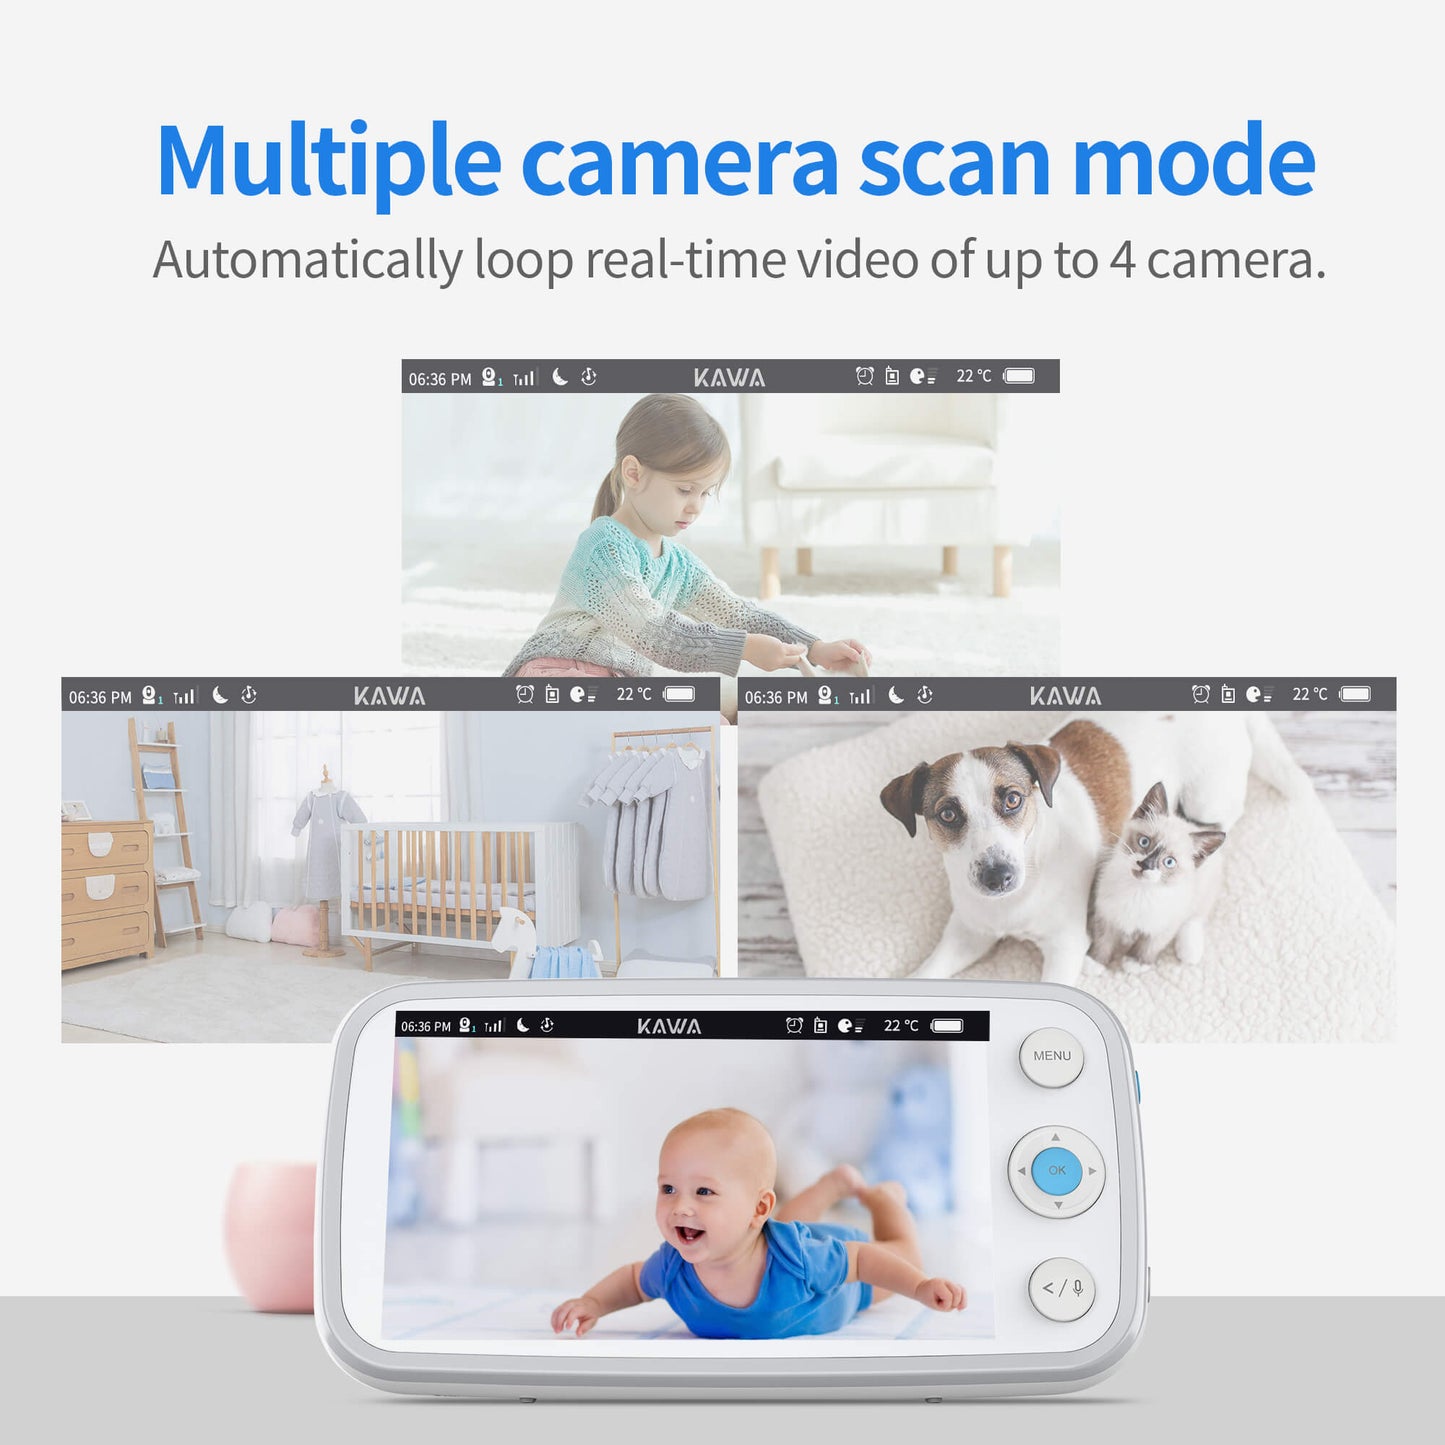 KAWA S6 | Add-on Baby Camera Without Batteries, 720p HD Video Baby Monitor Camera, No WiFi Security Split-Screen, Crisp Night Vision, 1000ft Range, 2X Zoom 2-Way Audio, 110°Wide Angle View (Monitor Not Include)